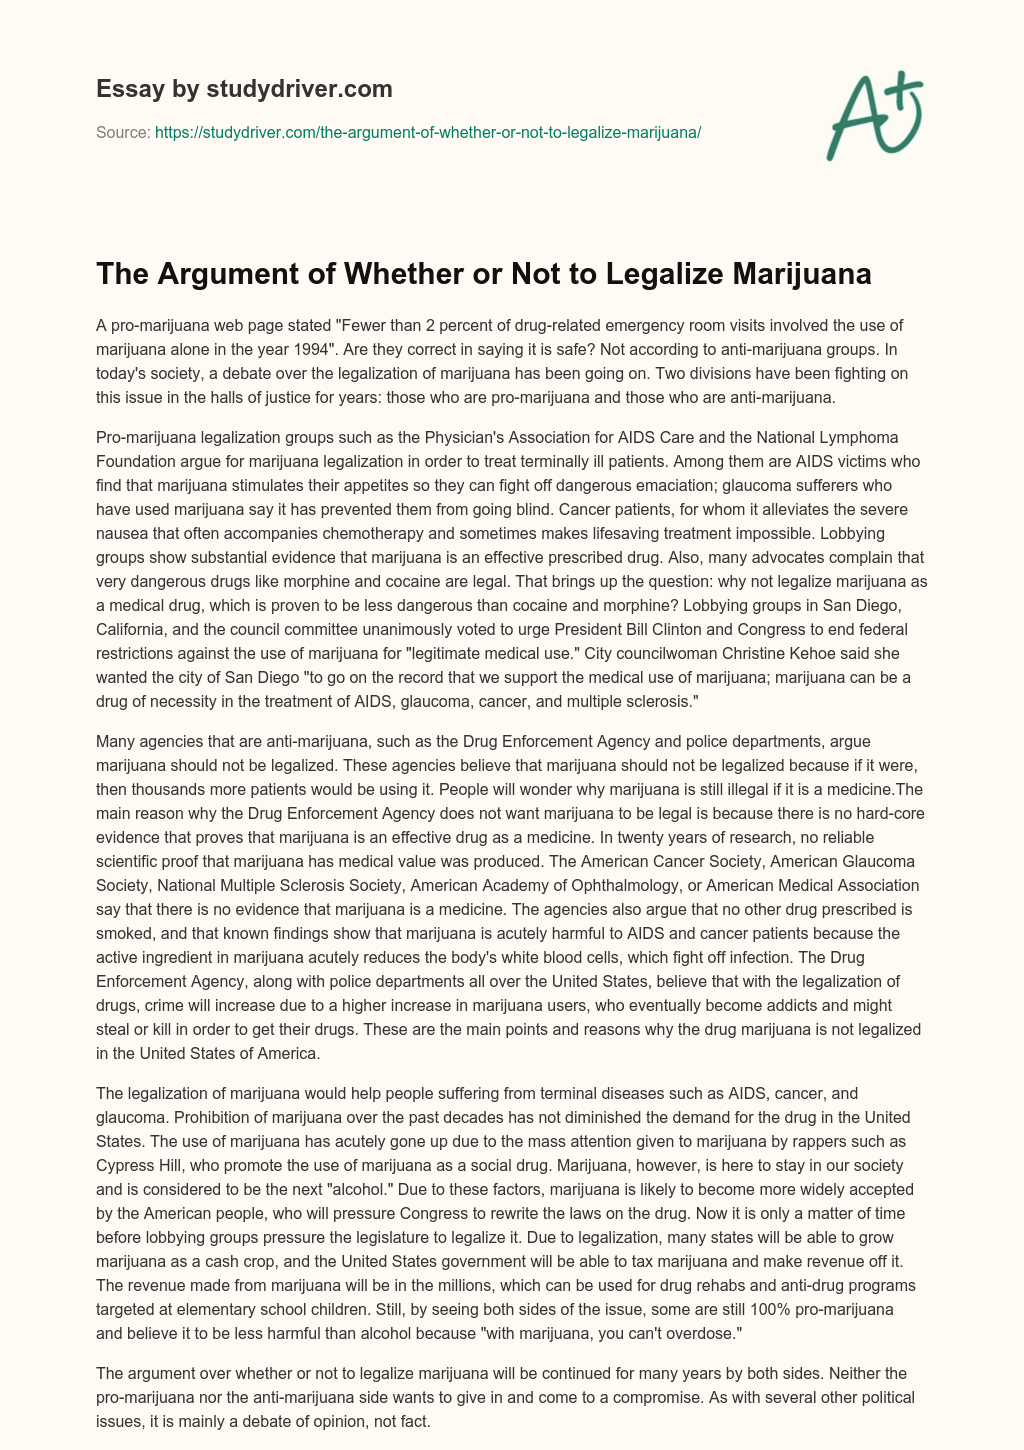 The Argument of Whether or not to Legalize Marijuana essay